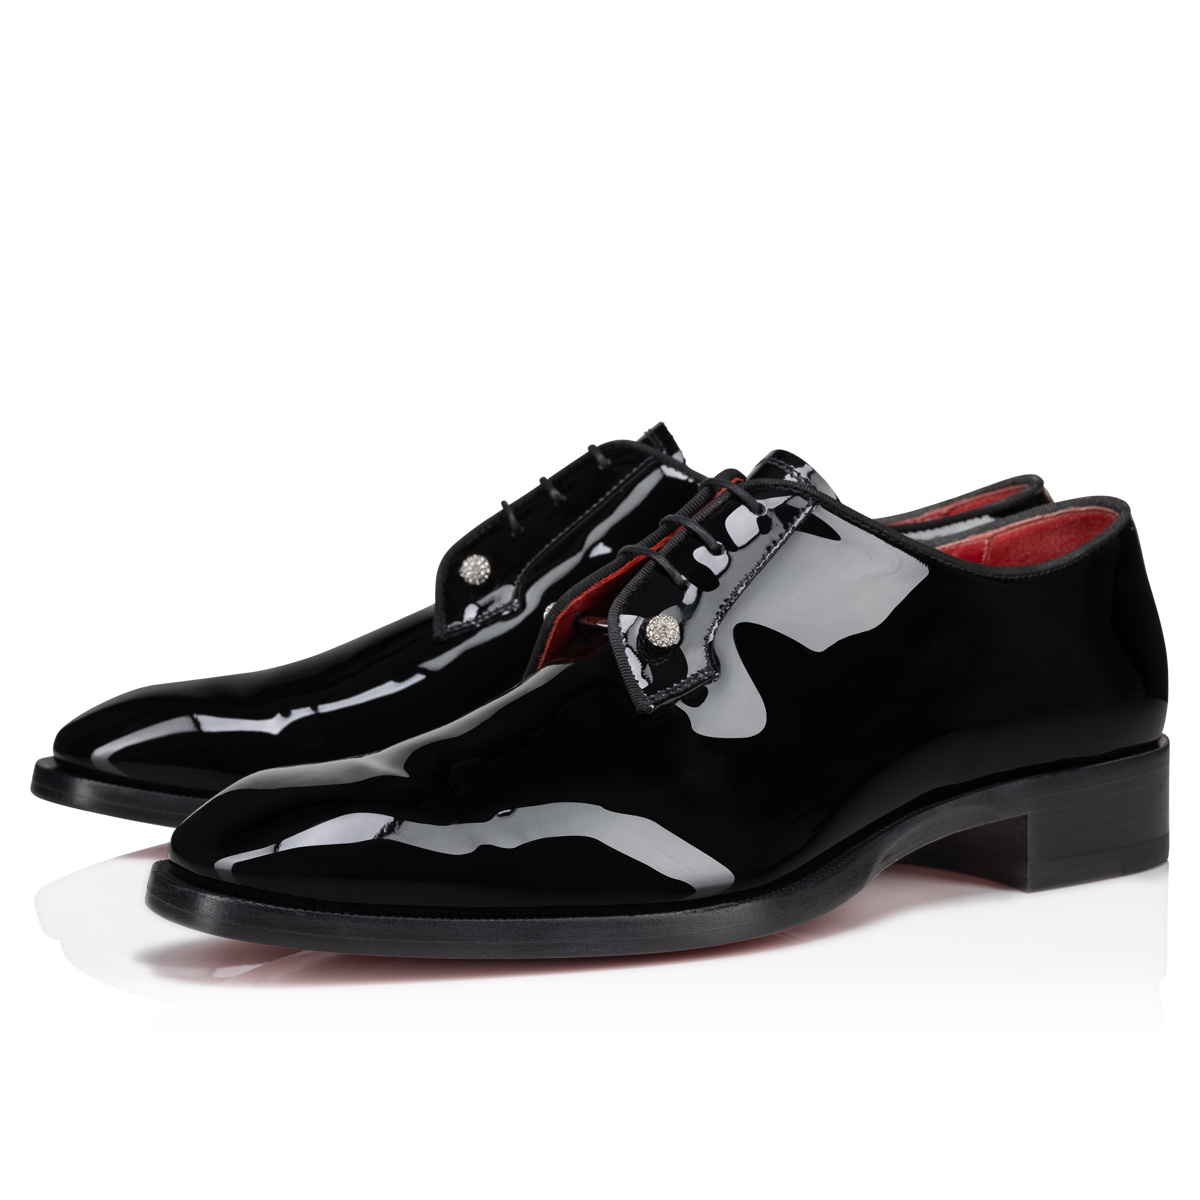 Chambeliss Night Strass - Derbies - Patent calf leather and 